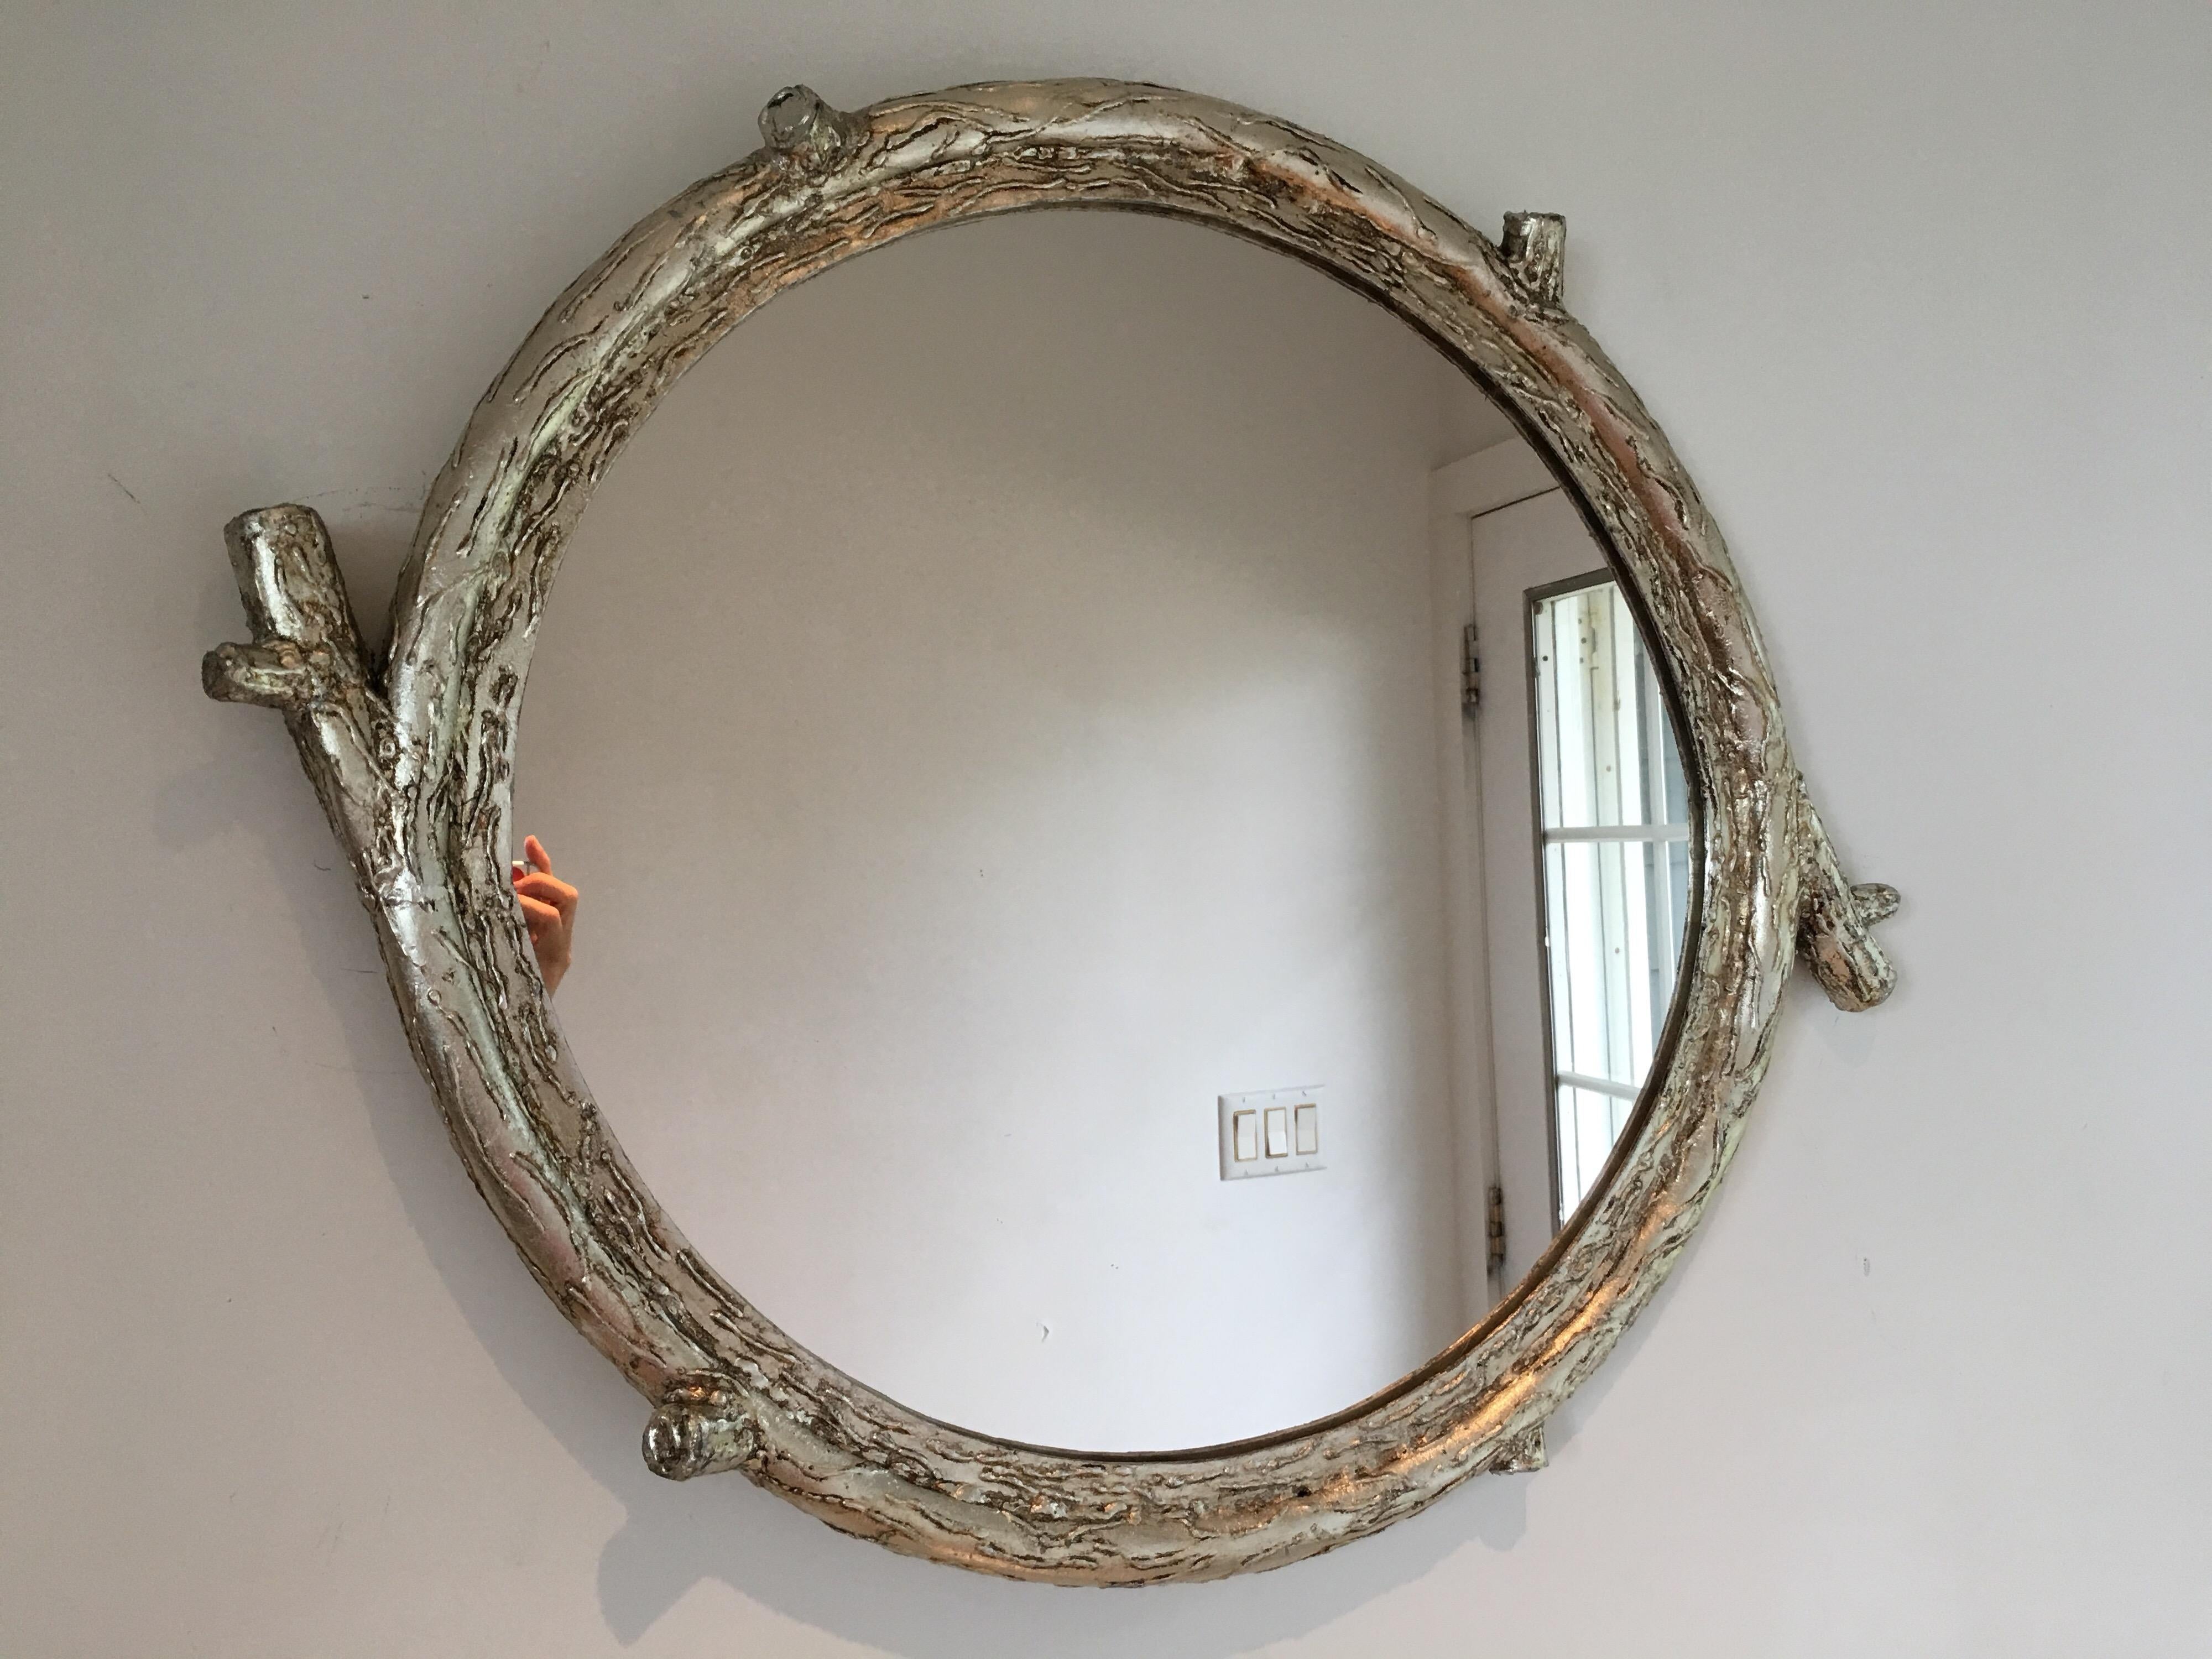 21st century silver-leaf wrought iron sculpted branch hiver mirror by CasaMidy
Measures: 29